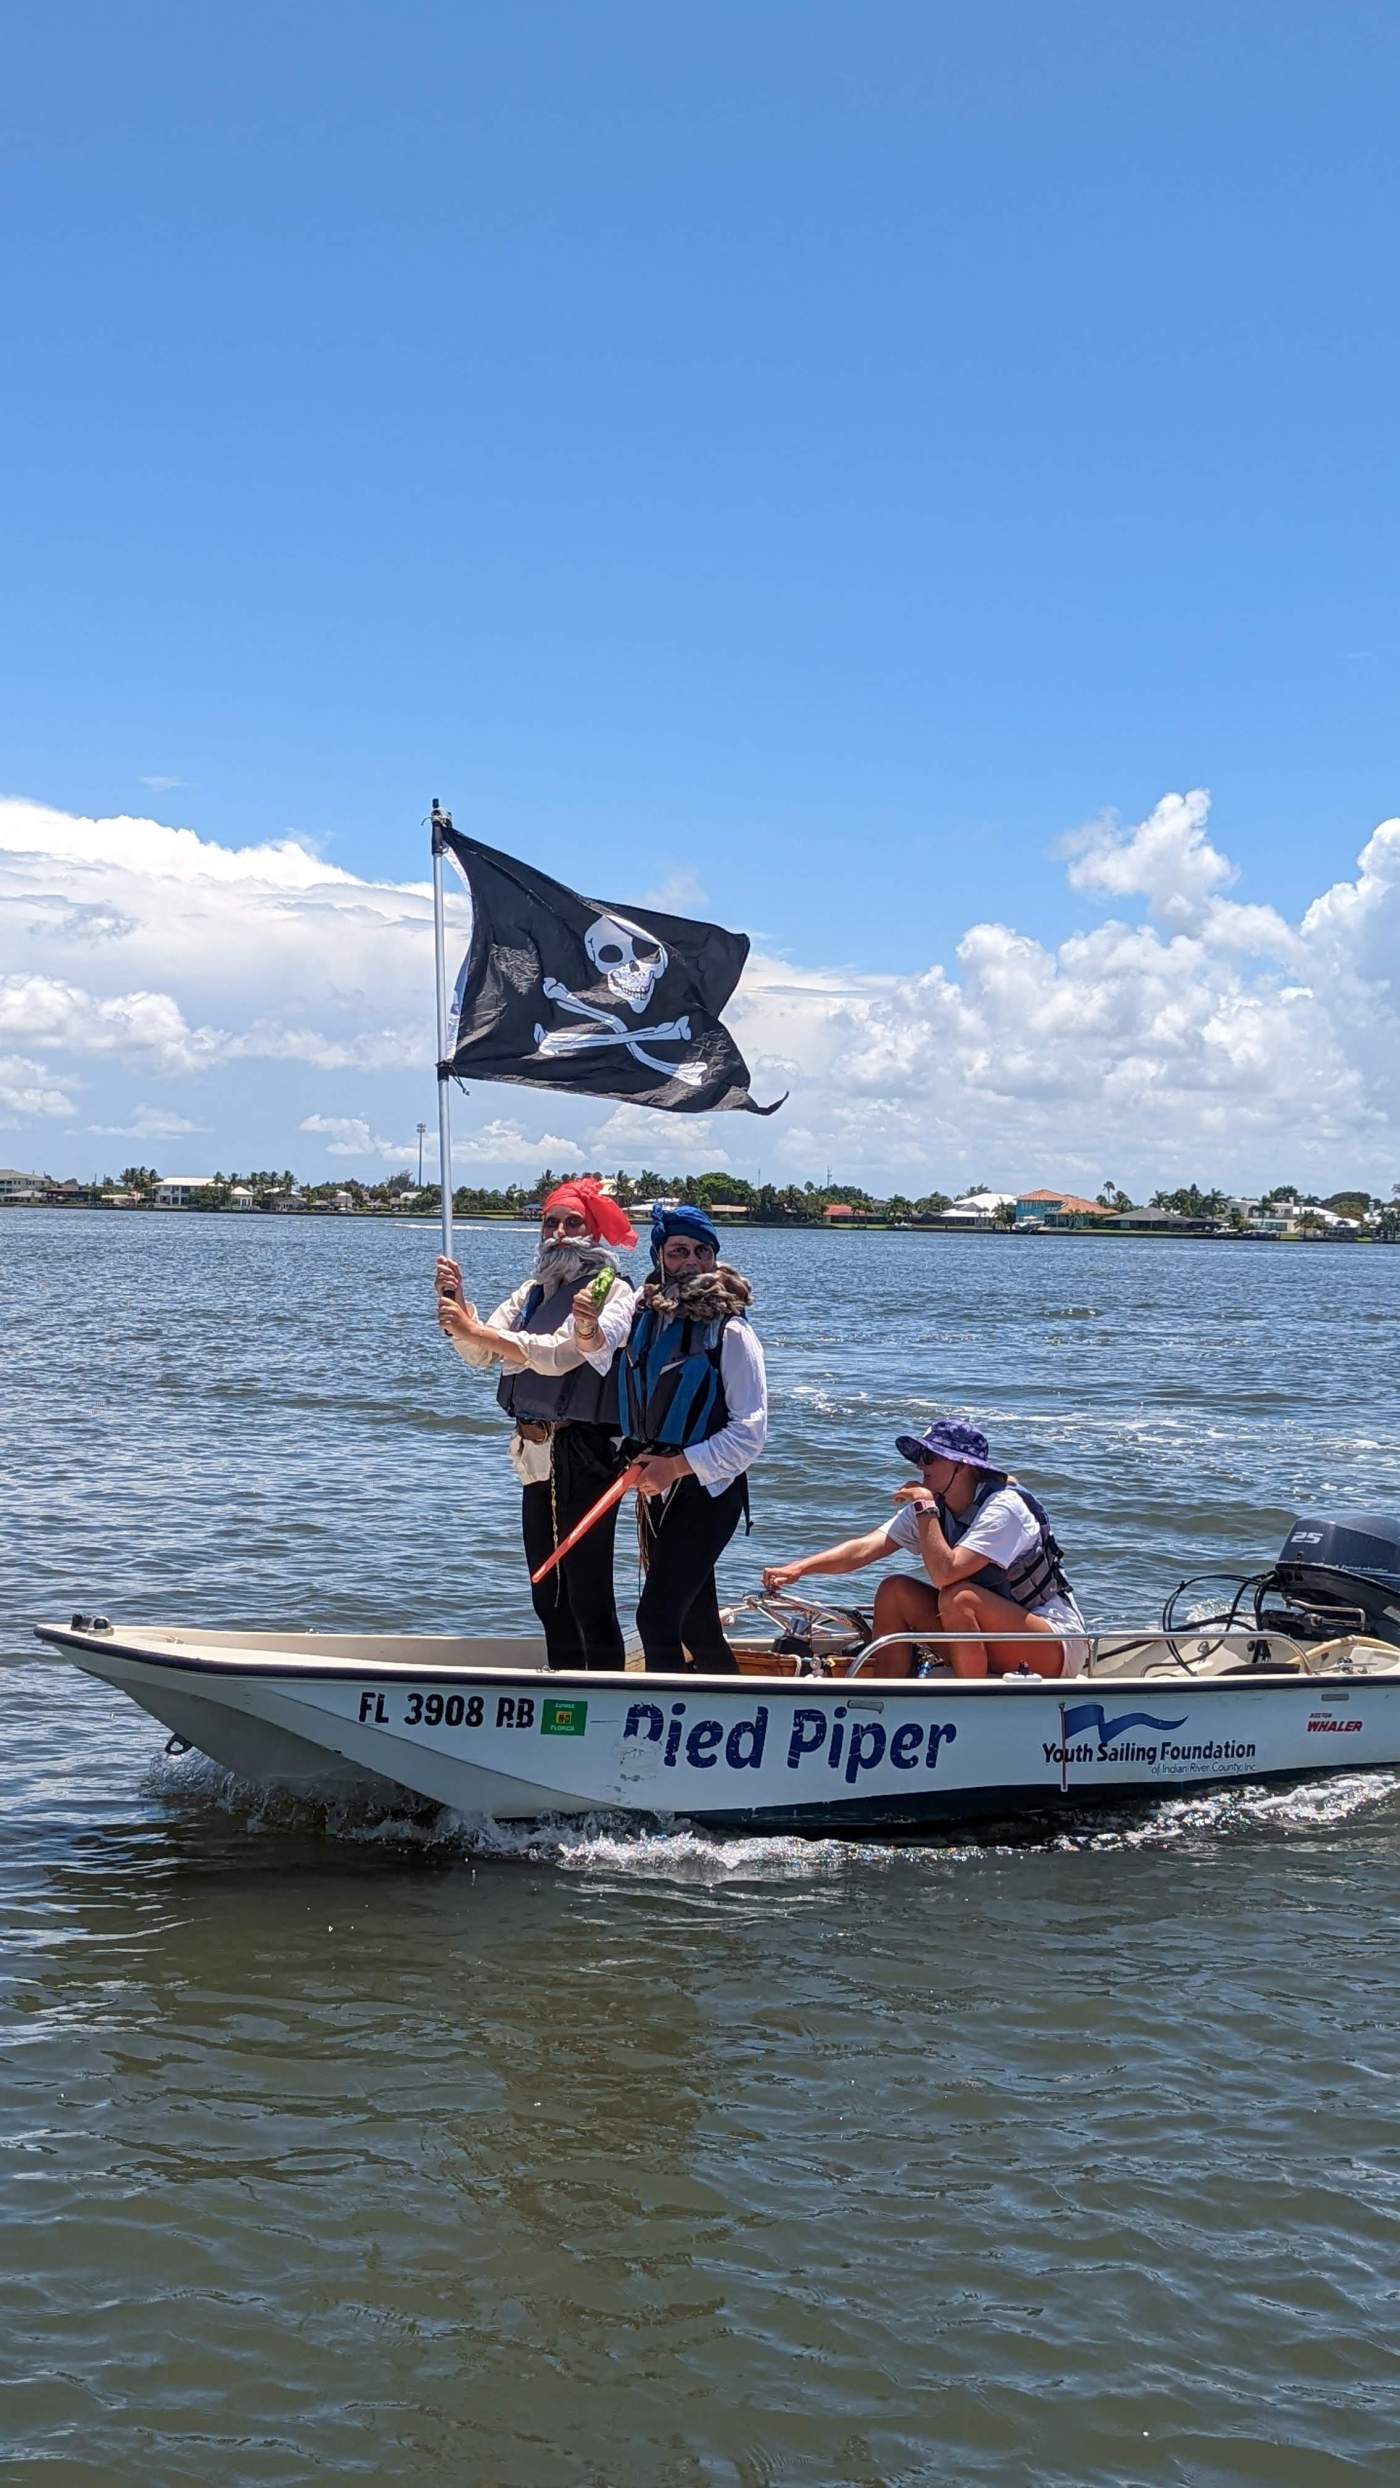 Powerboat flying a pirate flag